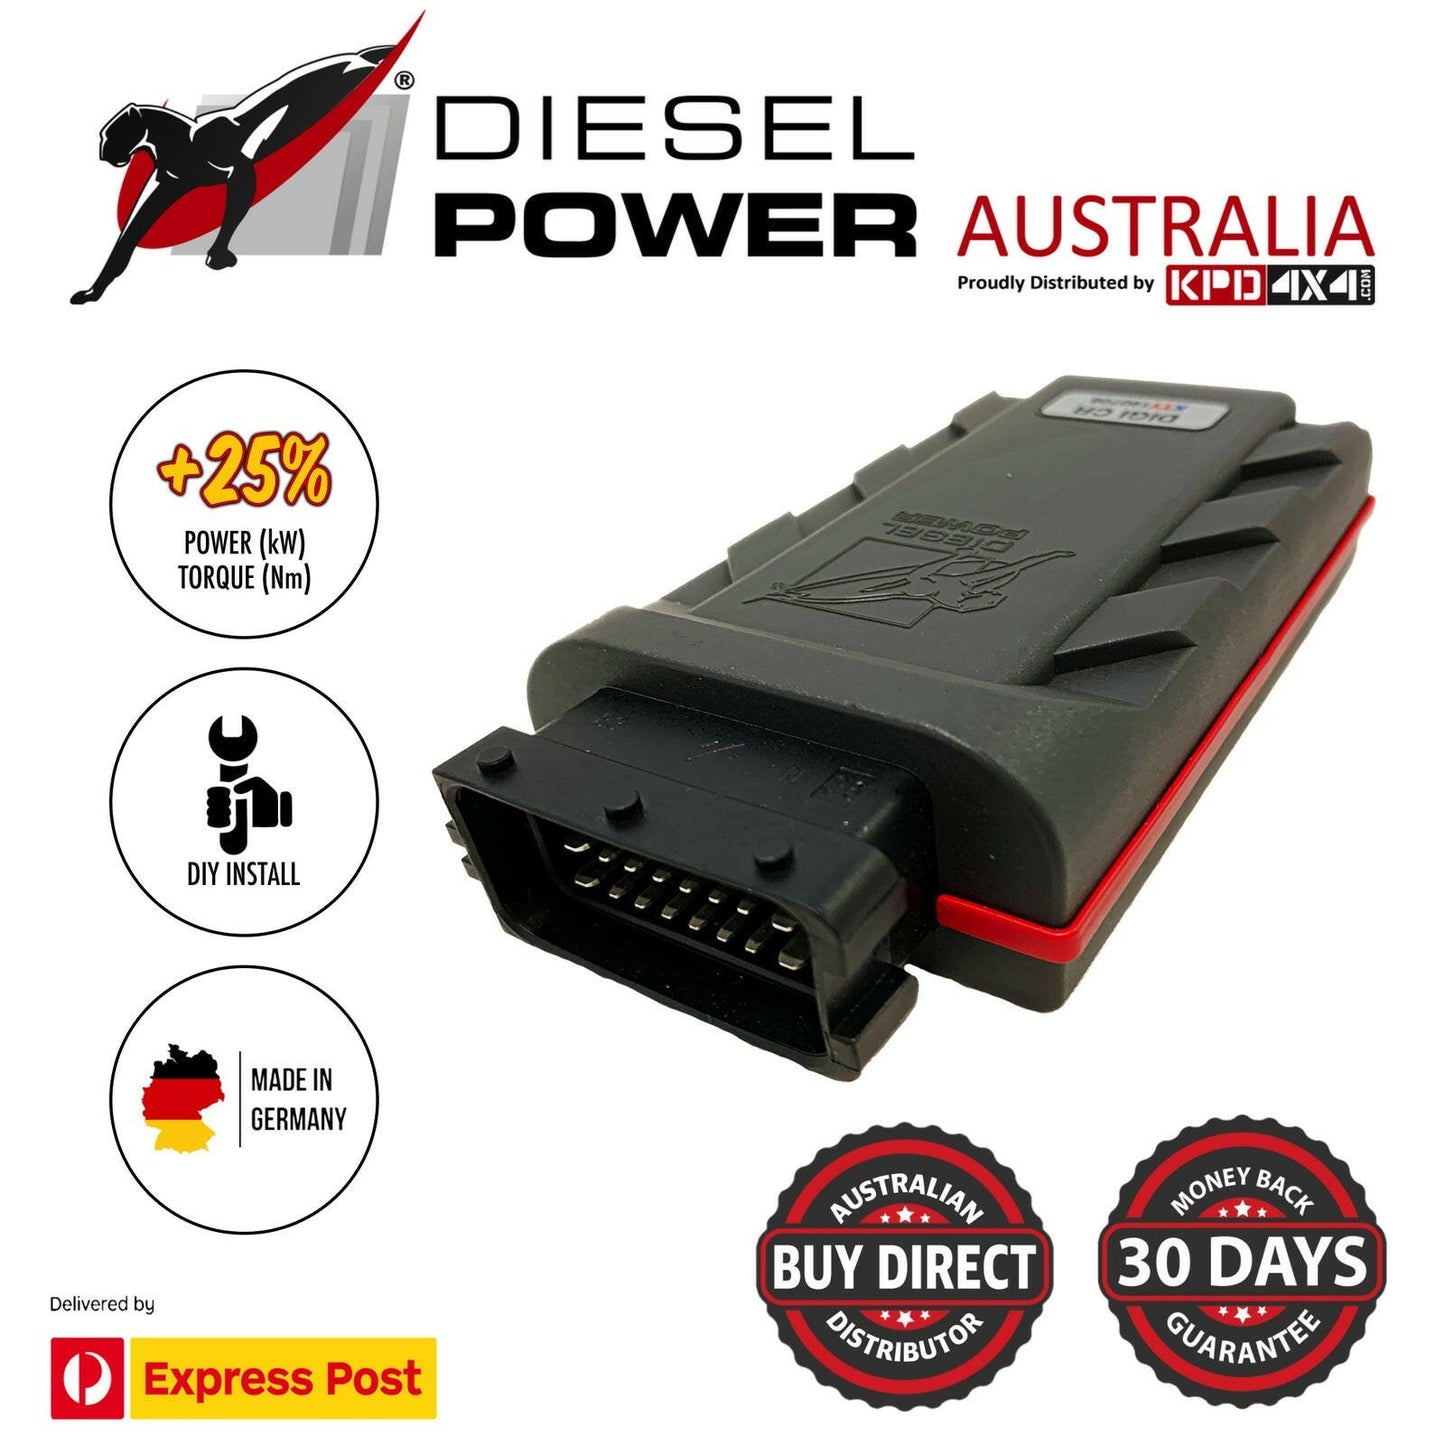 Diesel Power Module Performance Chip for Truck, Marine, Industrial/mining, Tractors and agricultural applications.